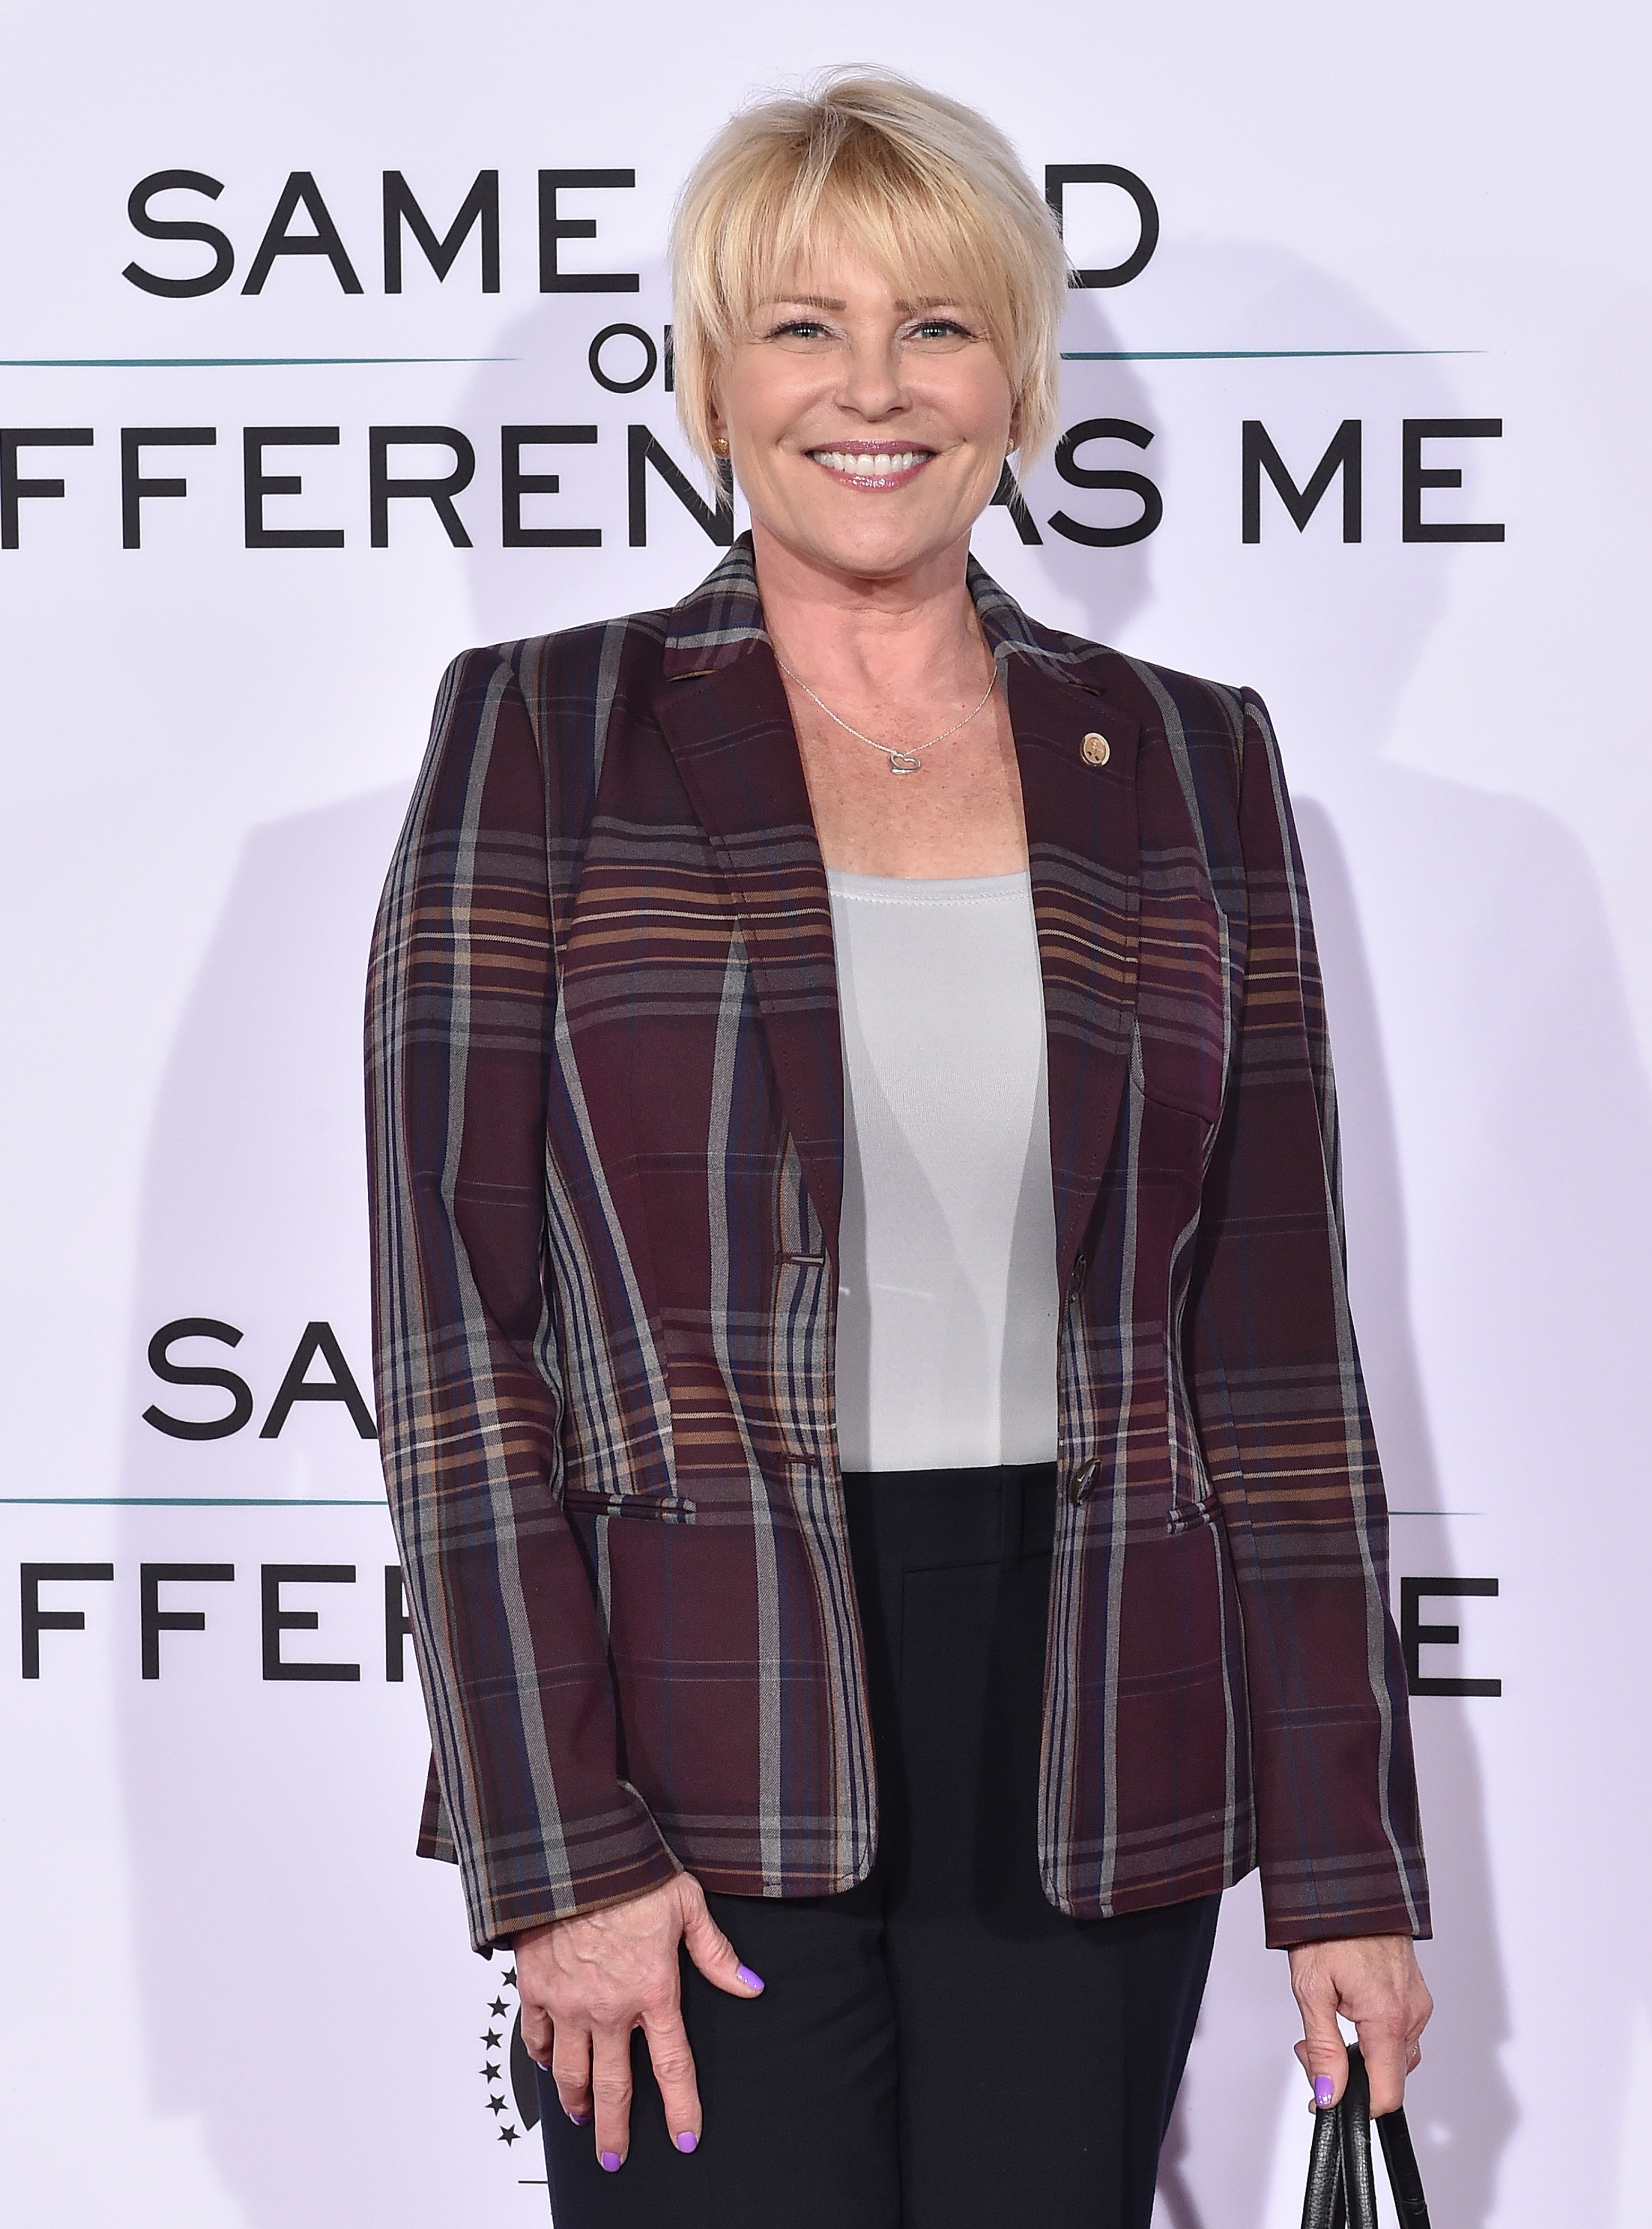 Judi Evans arrives at the premiere of "Same Kind of Different as Me" on October 12, 2017, in Westwood, California. | Source: Getty Images.